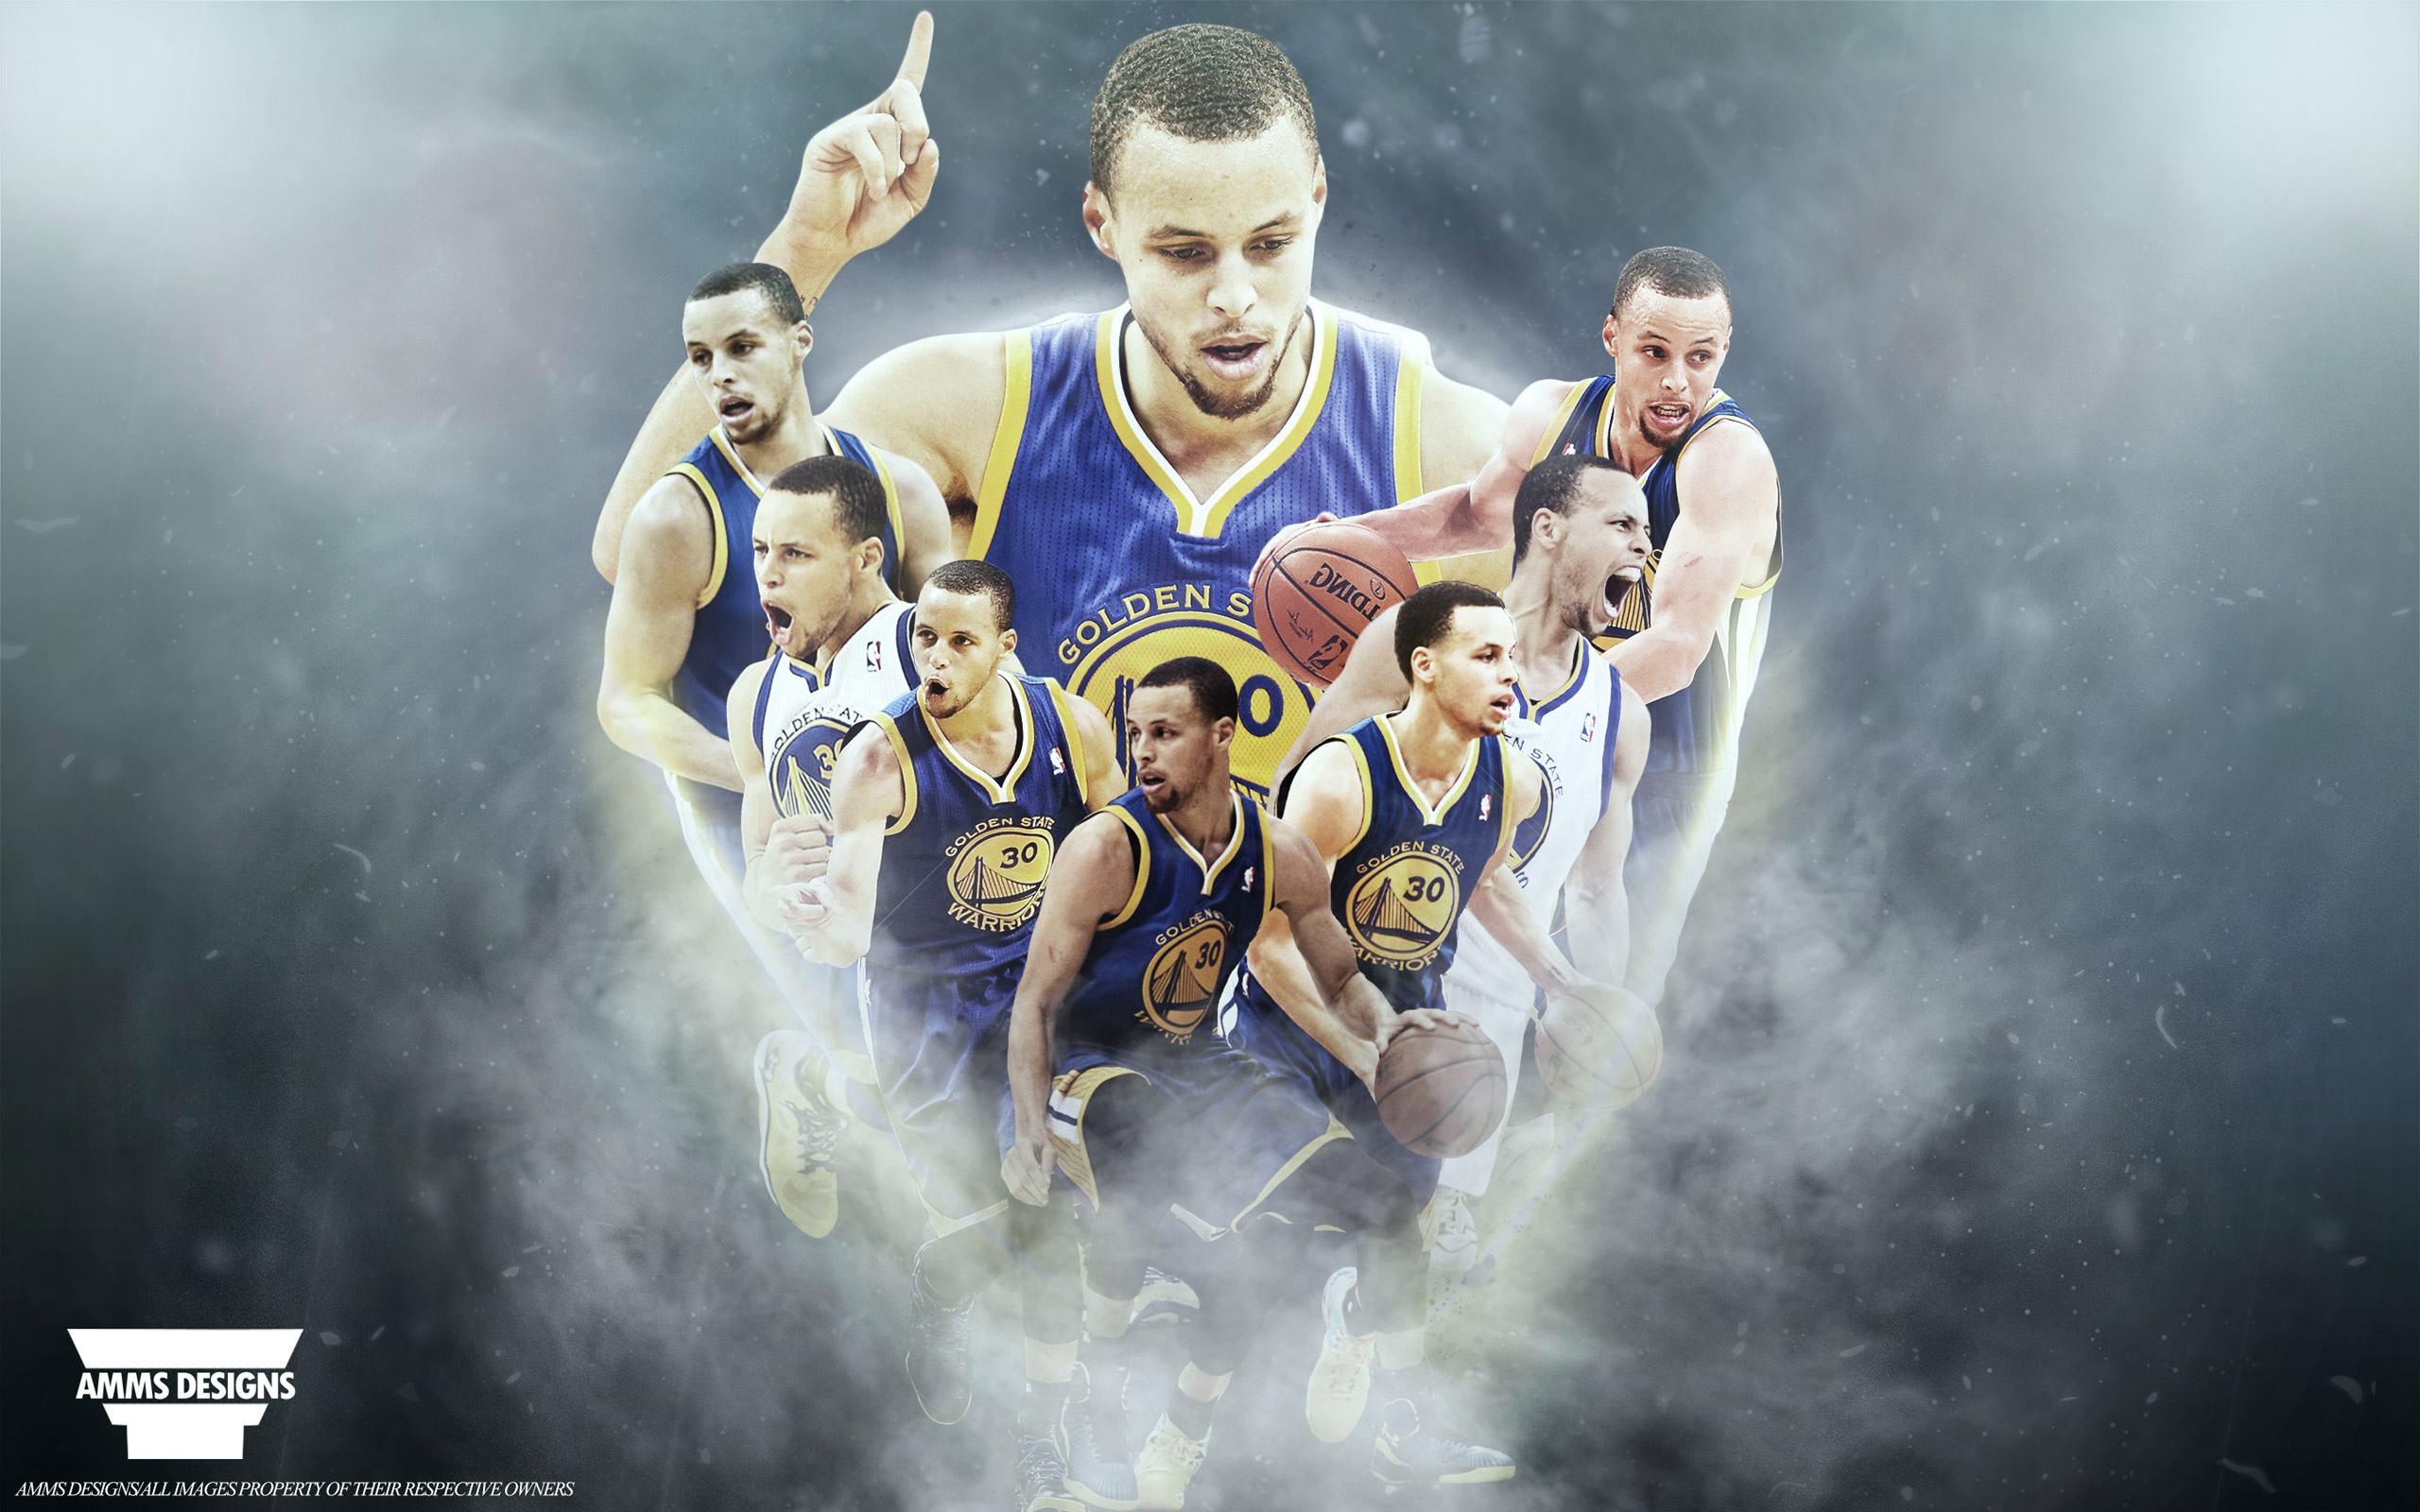 Free Download Stephen Curry 14 15 Nba Mvp Wallpaper Basketball Wallpapers 2560x1600 For Your Desktop Mobile Tablet Explore 50 Lebron James Mvp Wallpapers 15 Lebron James Mvp Wallpapers 15